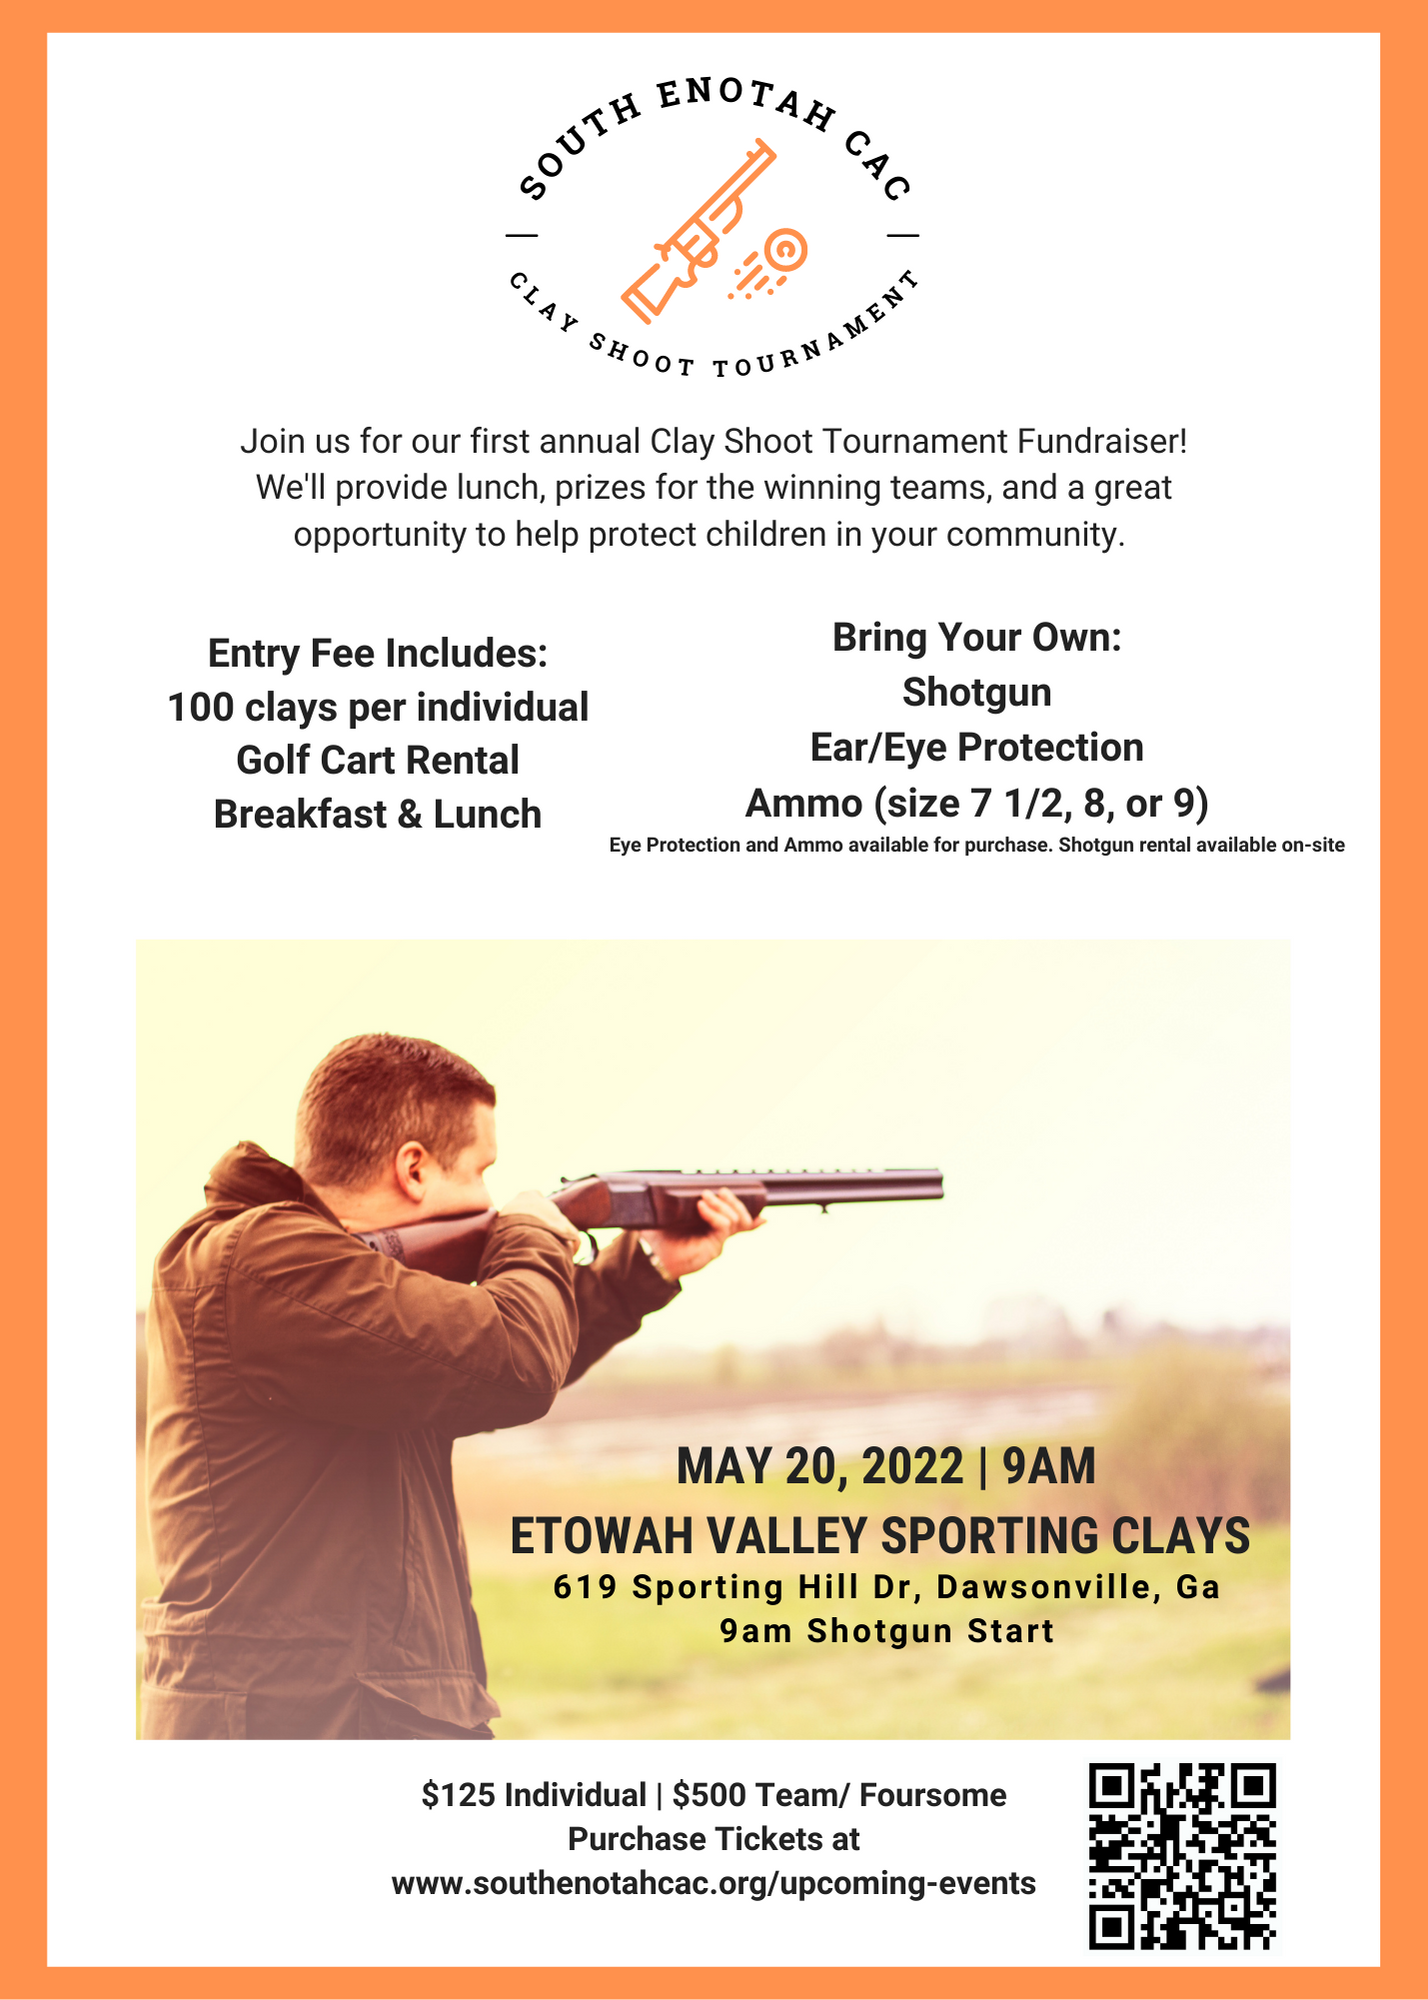 South Enotah Cac Clay Shooting Tournament Etowah Valley Sporting Clays